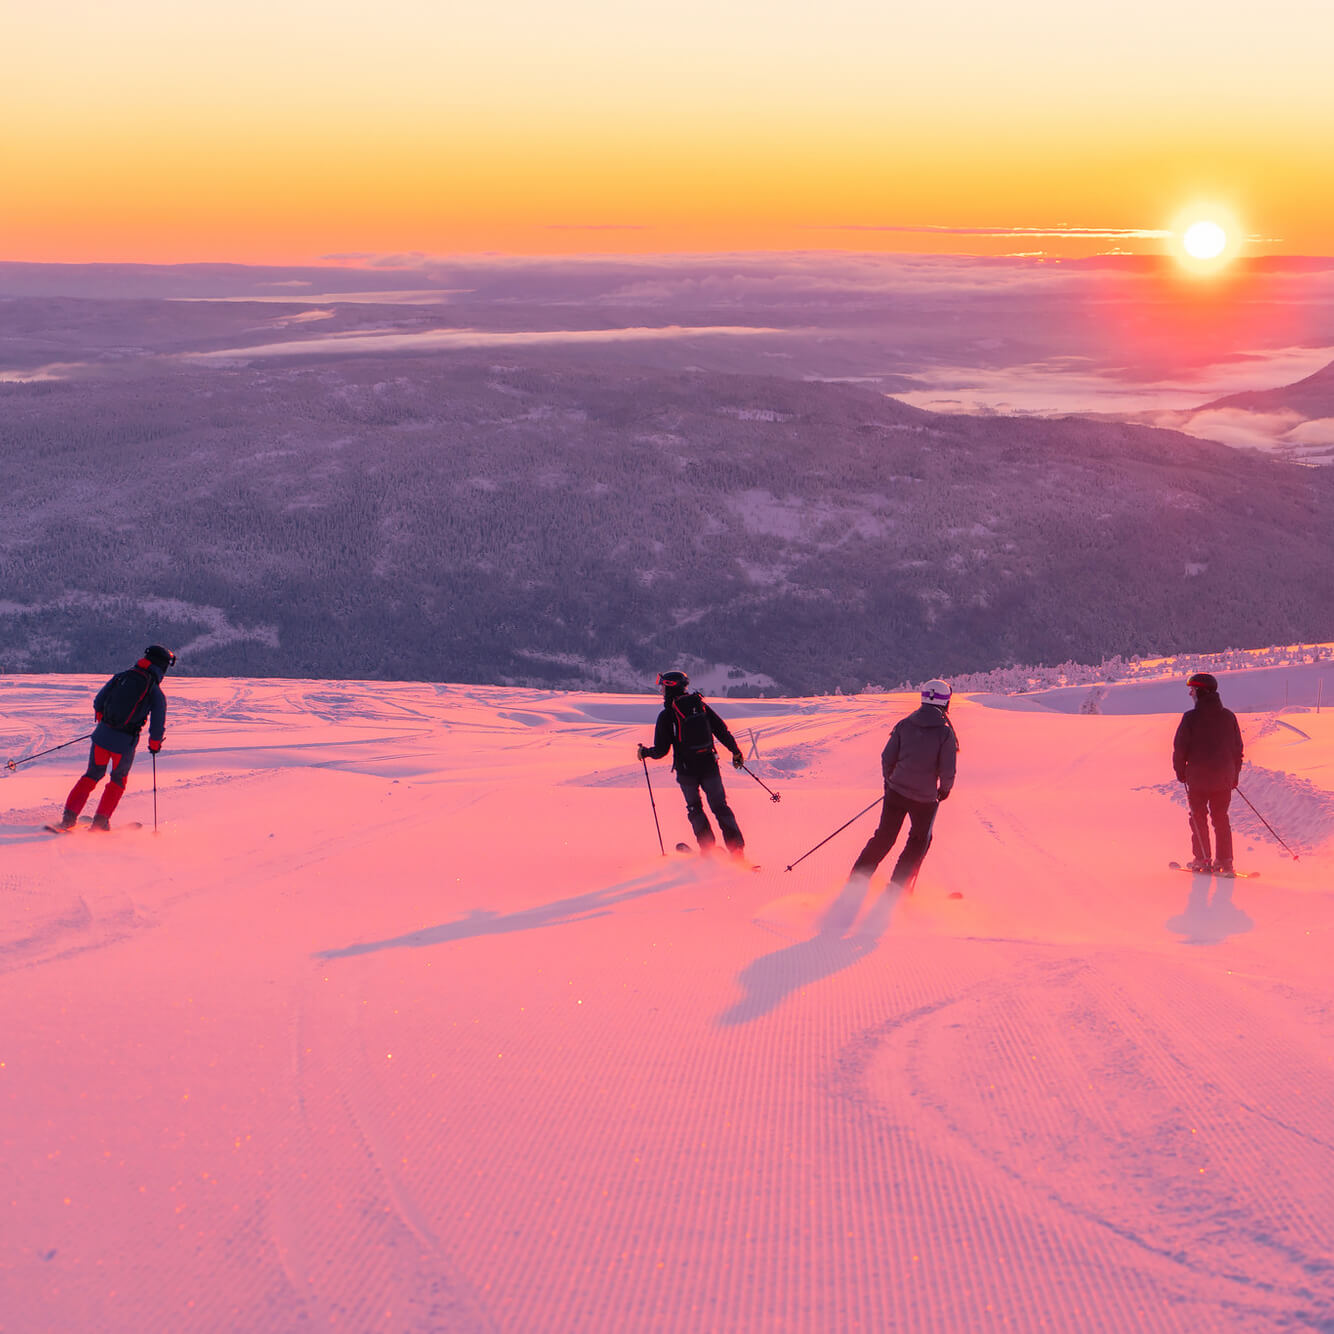 People skiing in the slopes at sunset in Norefjell.